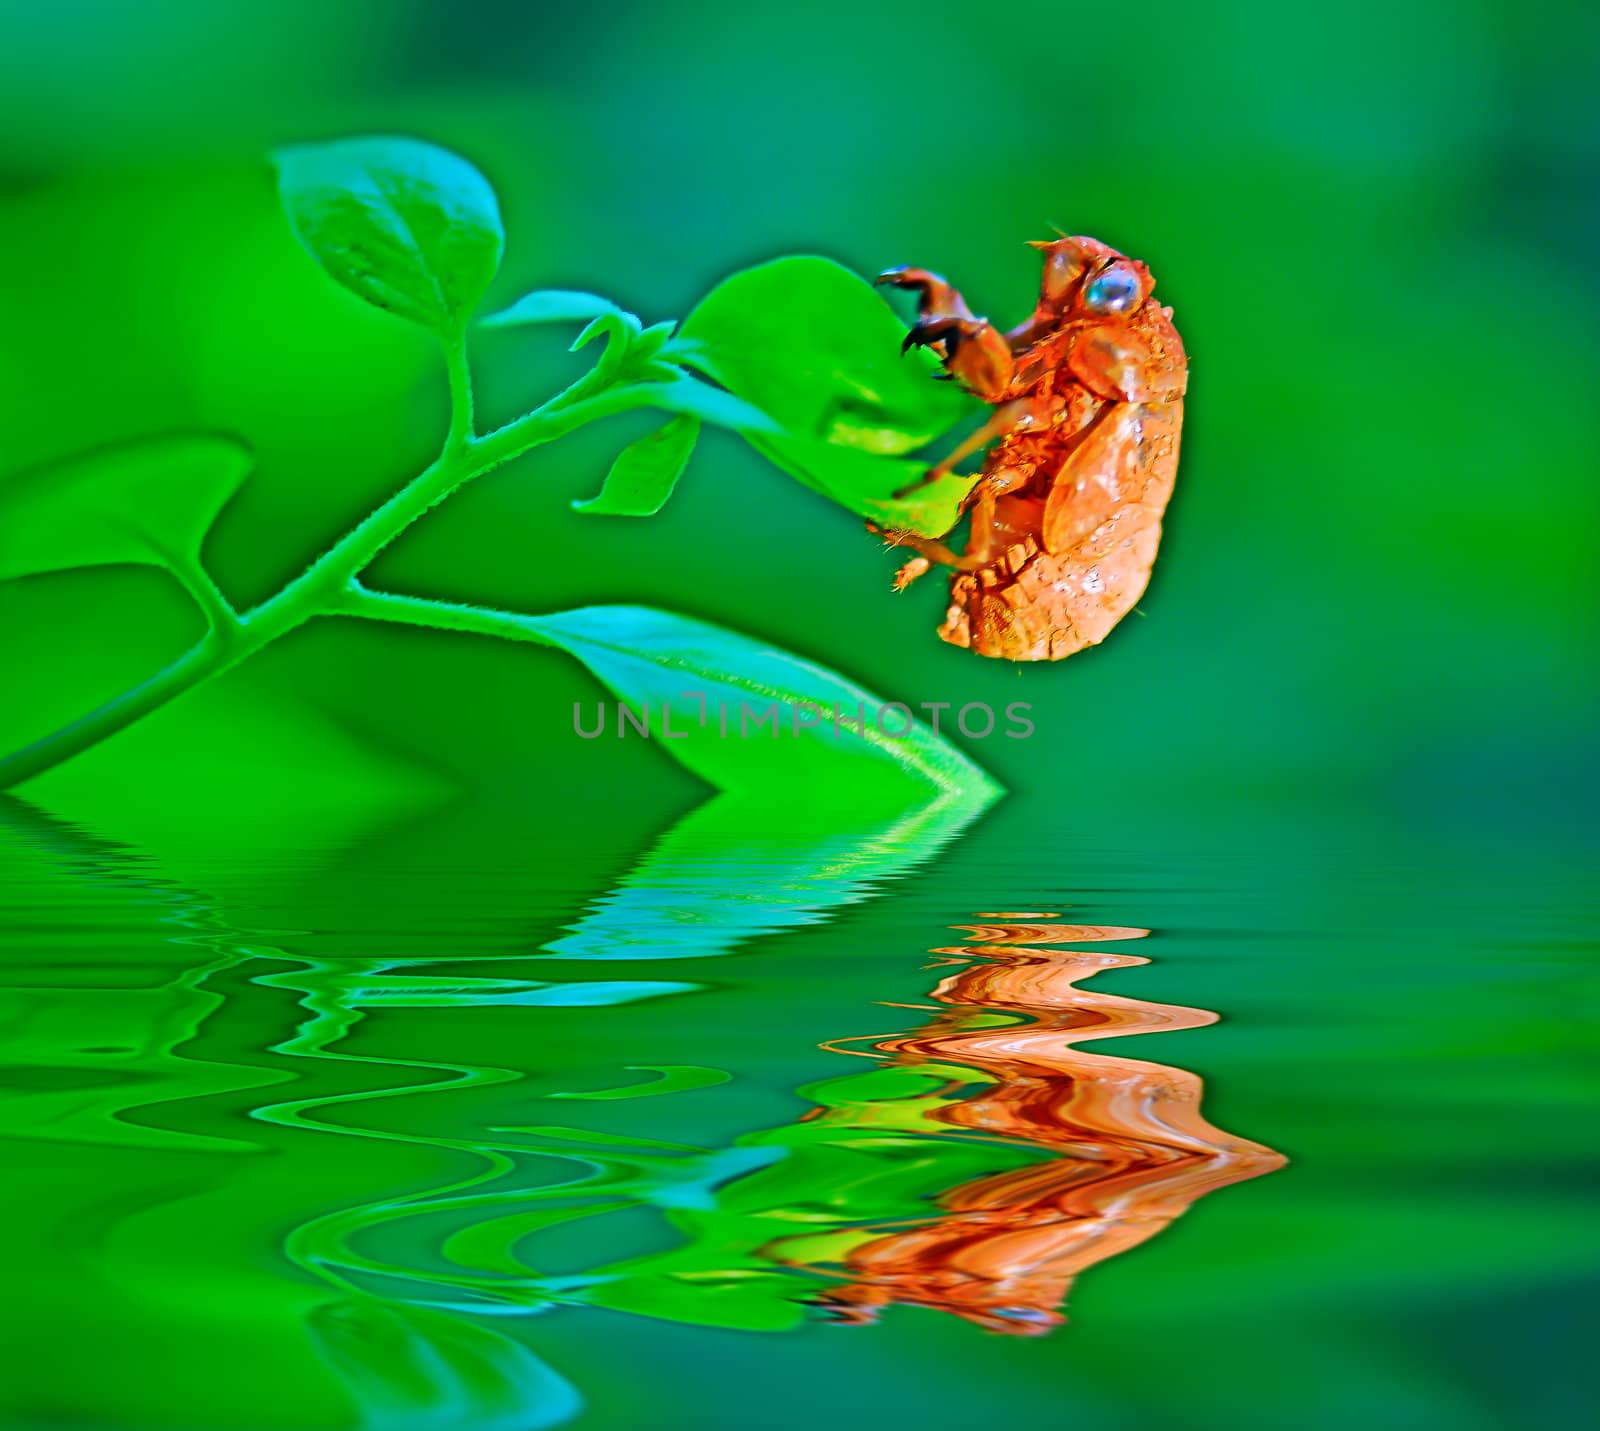 Red cicada shell and greenery reflecting, forming a colorful pattern